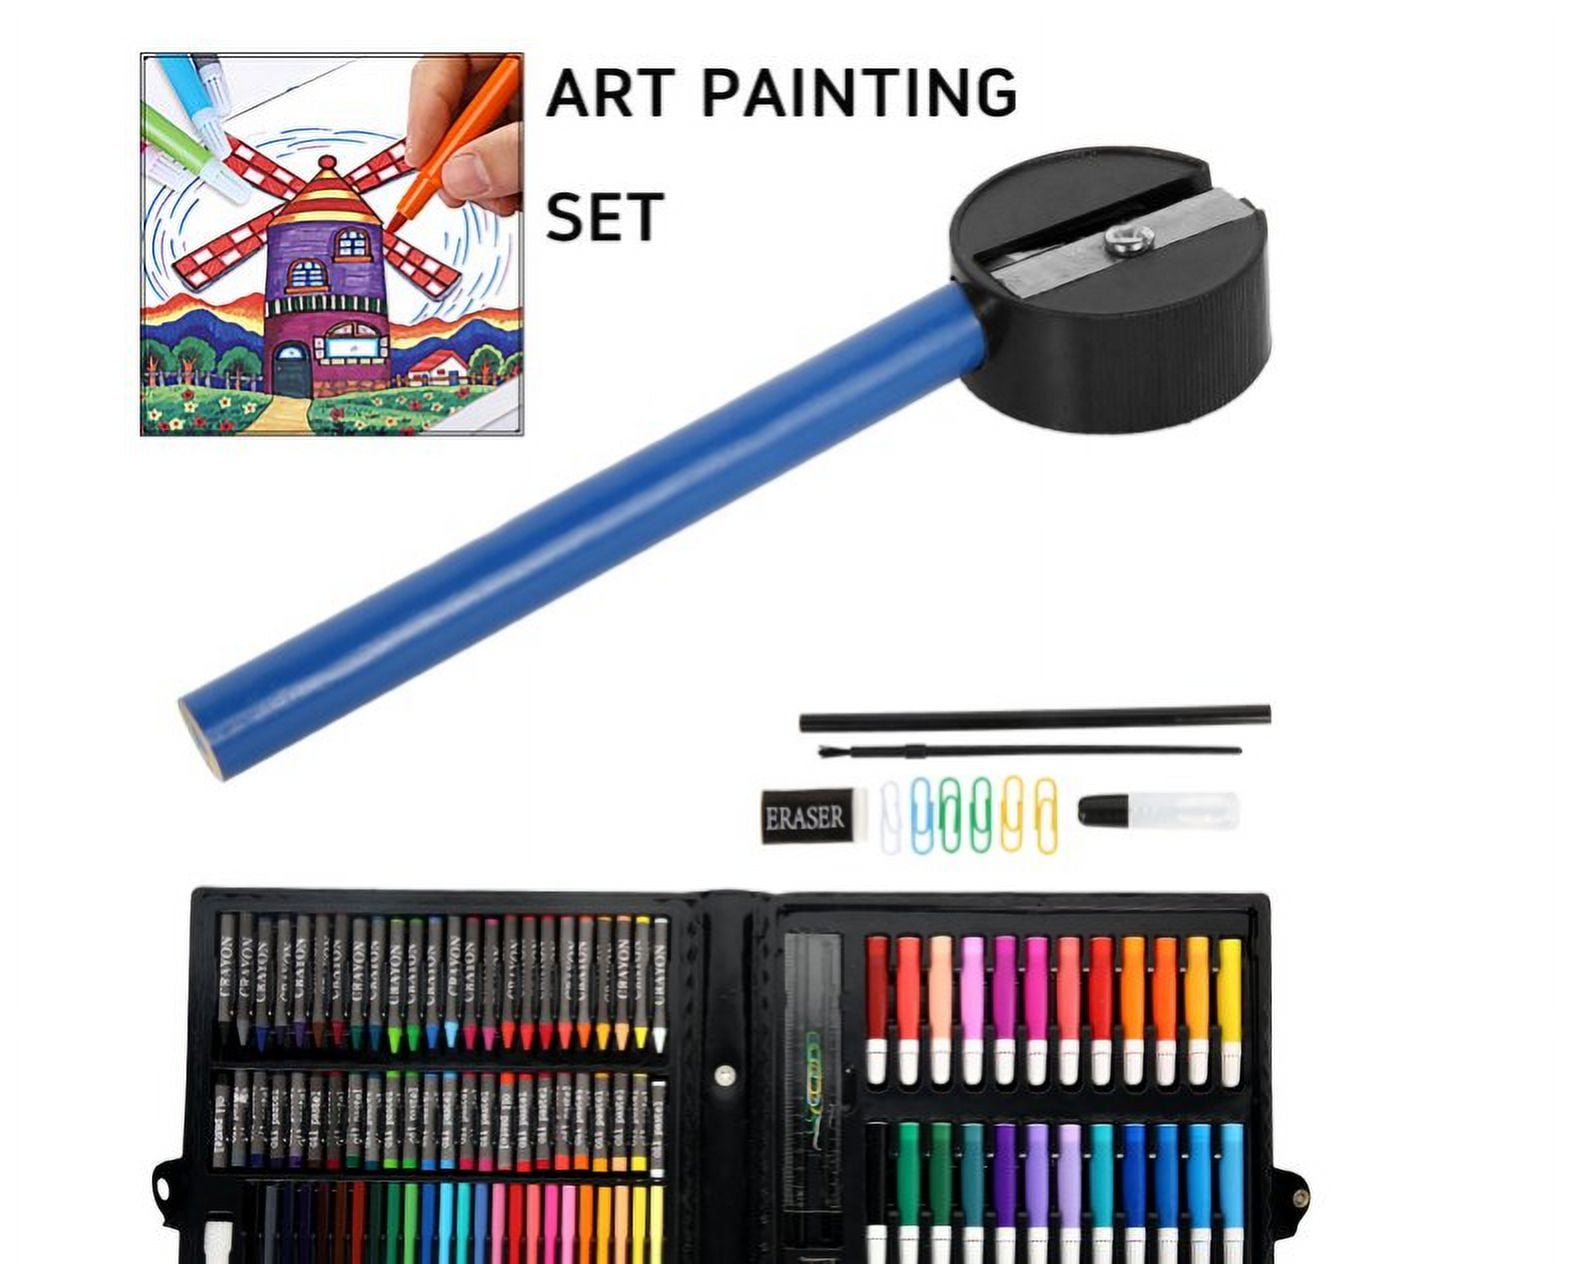 150-Piece Art Set, Art Set for Kids,Deluxe Professional Color Set, Gifts  Art Set Case,Art Kits for Kids and Adult,Includes Oil Pastels, Crayons,  Colored Pencils,Christmas Gifts(Black) 